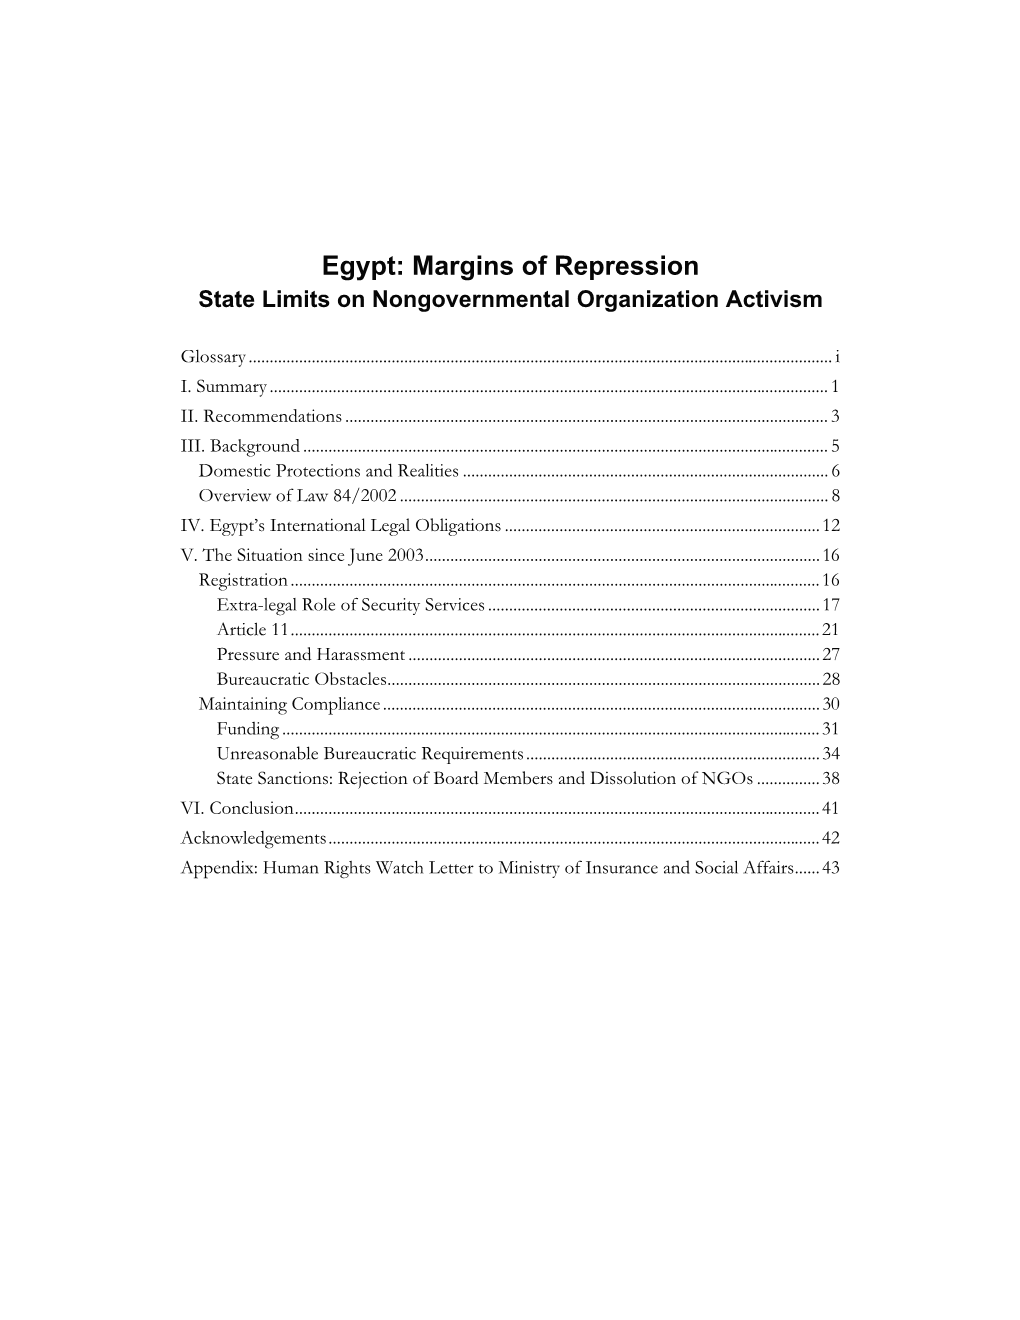 Egypt: Margins of Repression State Limits on Nongovernmental Organization Activism